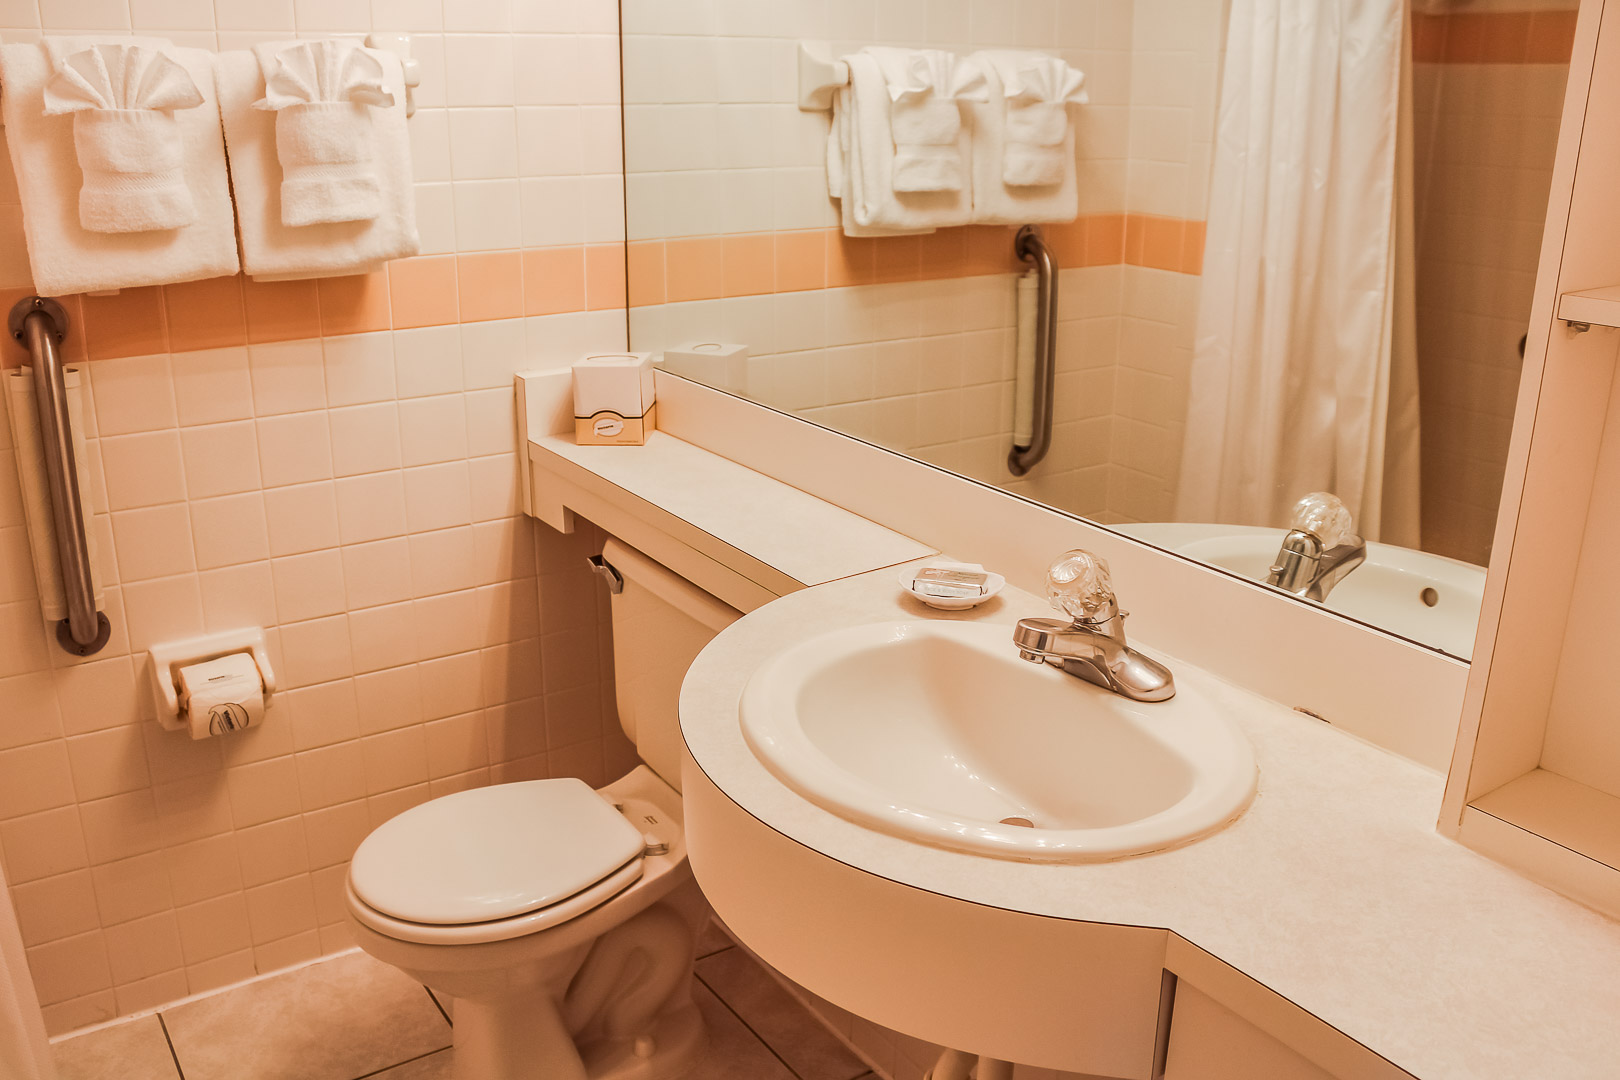 A clean bathroom at VRI's Berkshire on the Ocean in Florida.